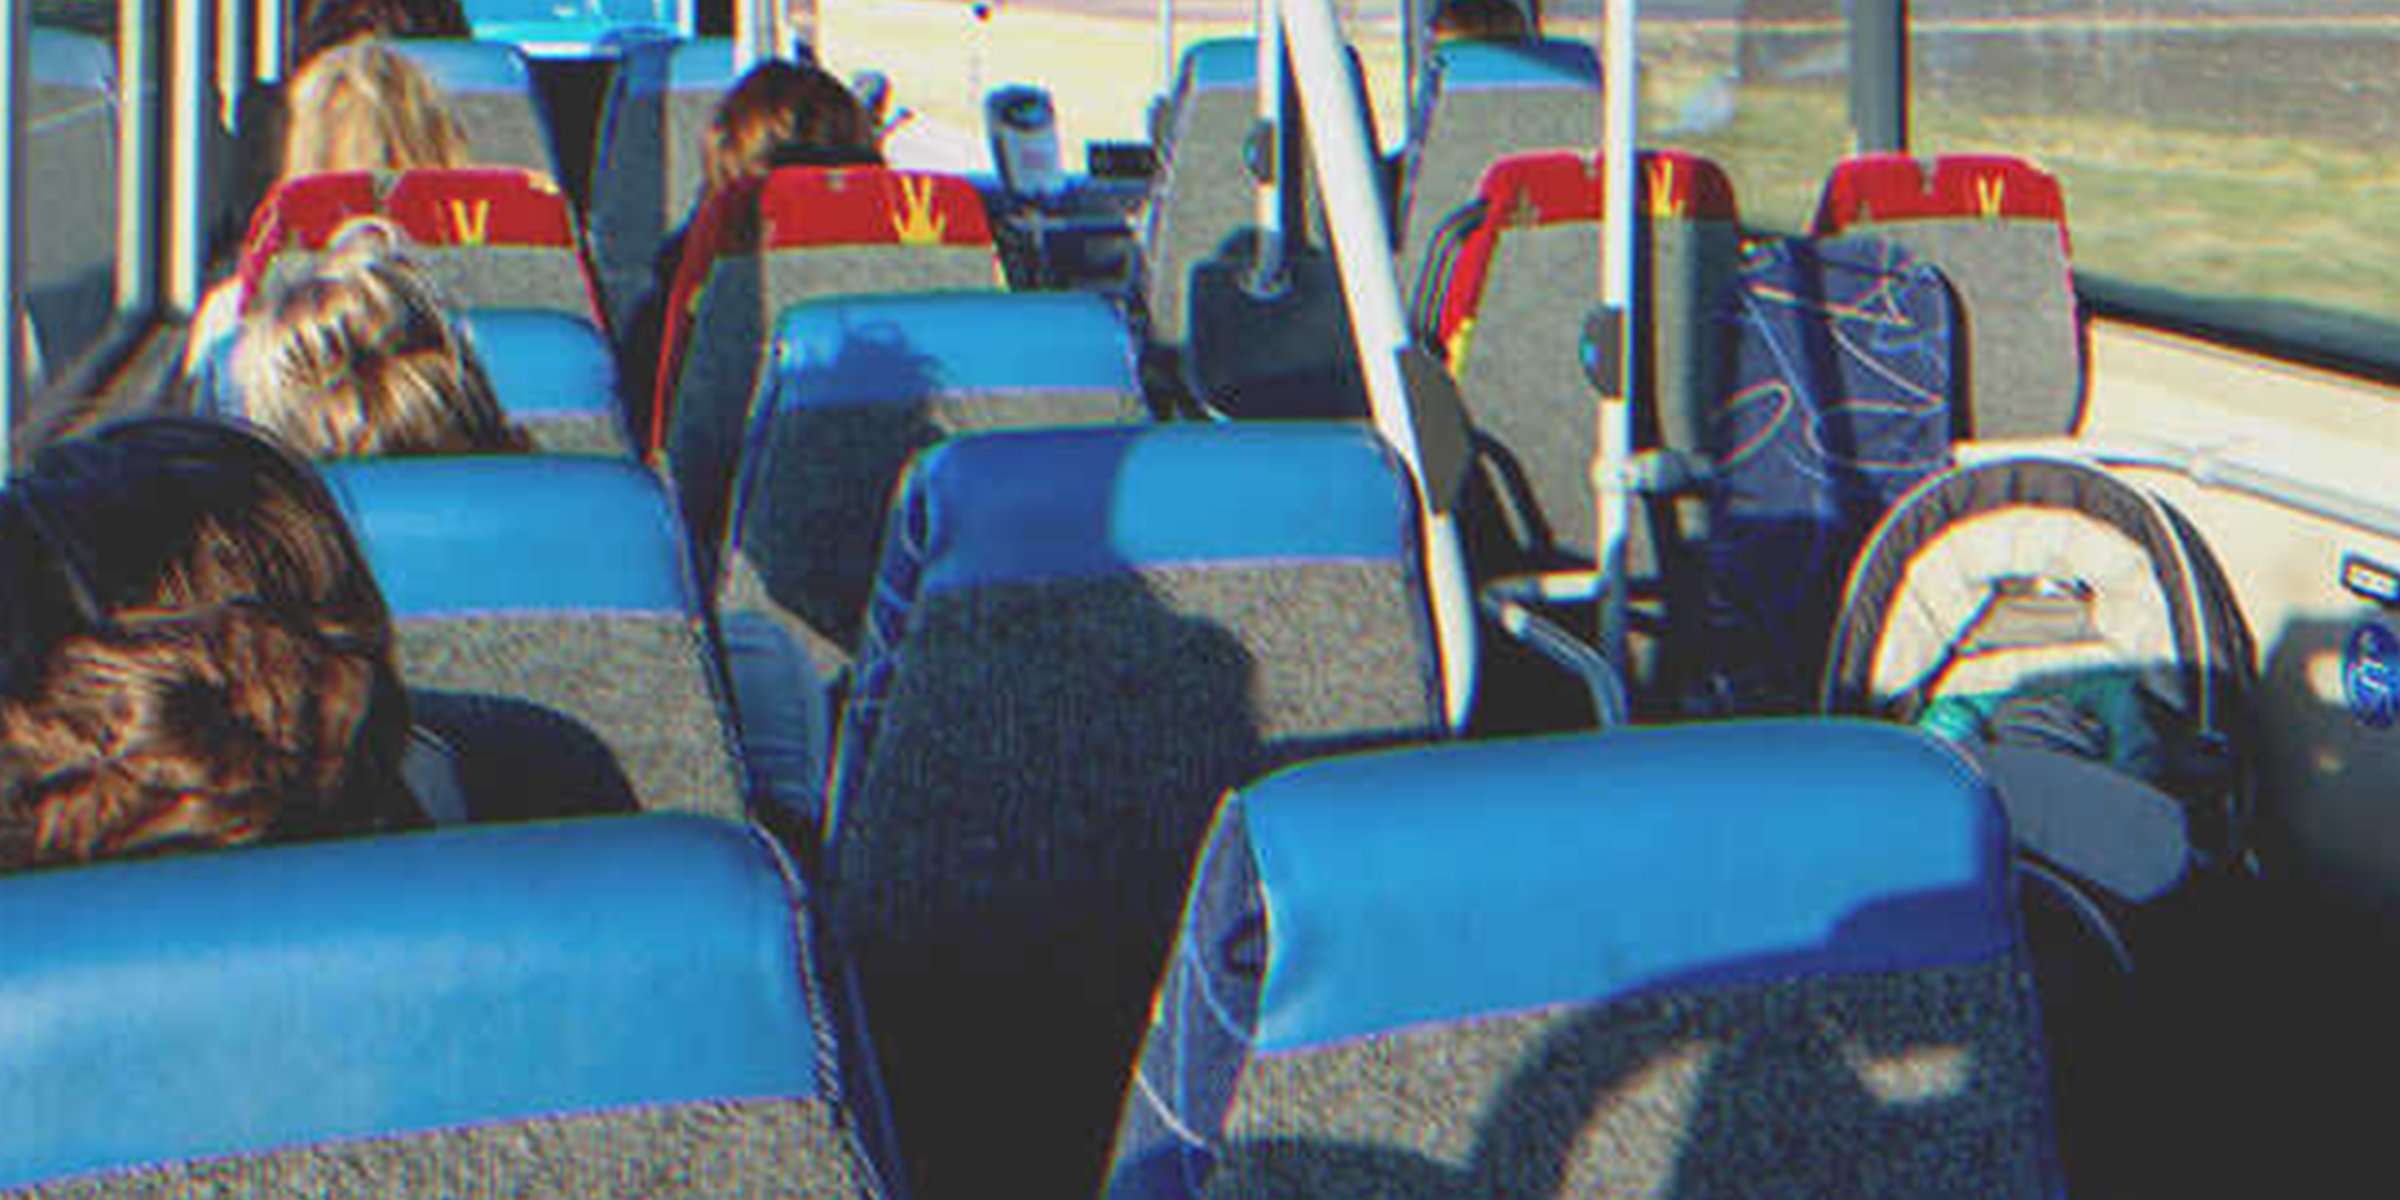 Several bus seats | Source: Shutterstock